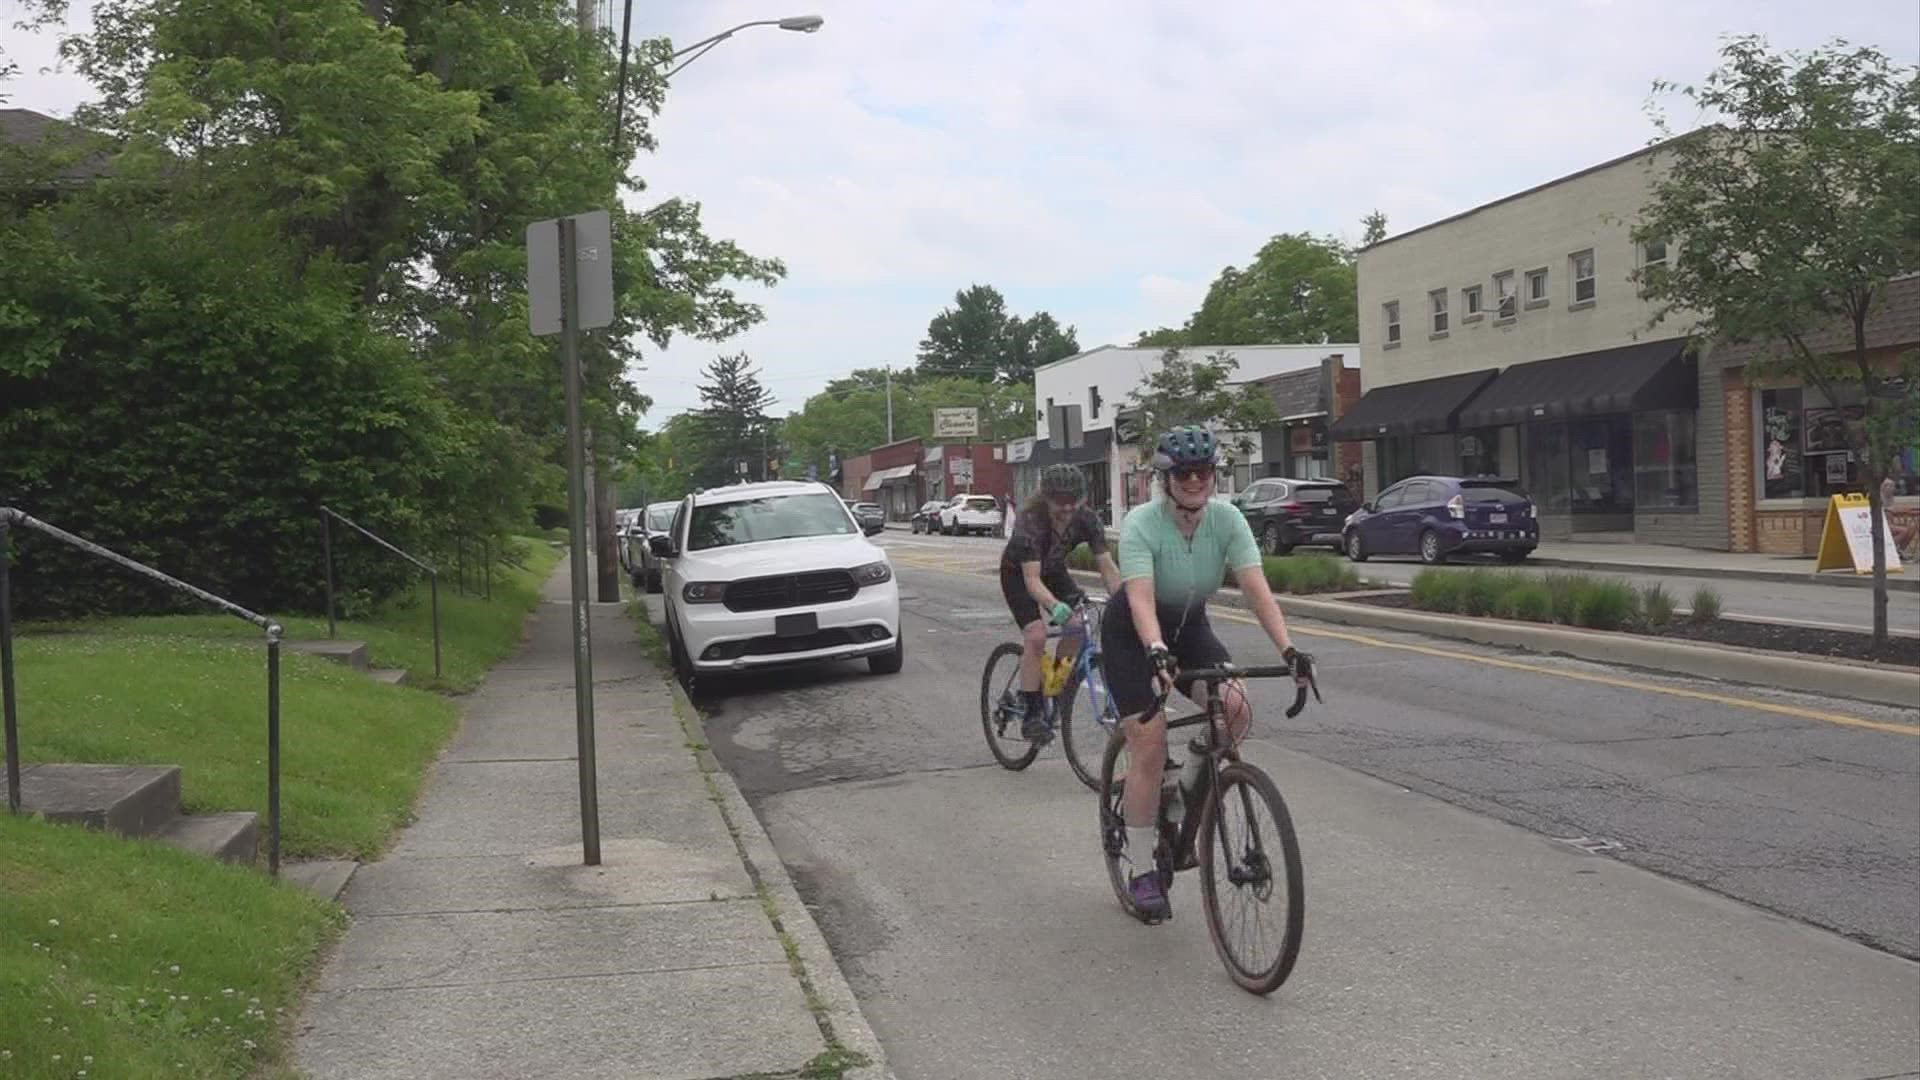 The new plan makes way for seven miles of continuous bike lanes on both sides of the street.